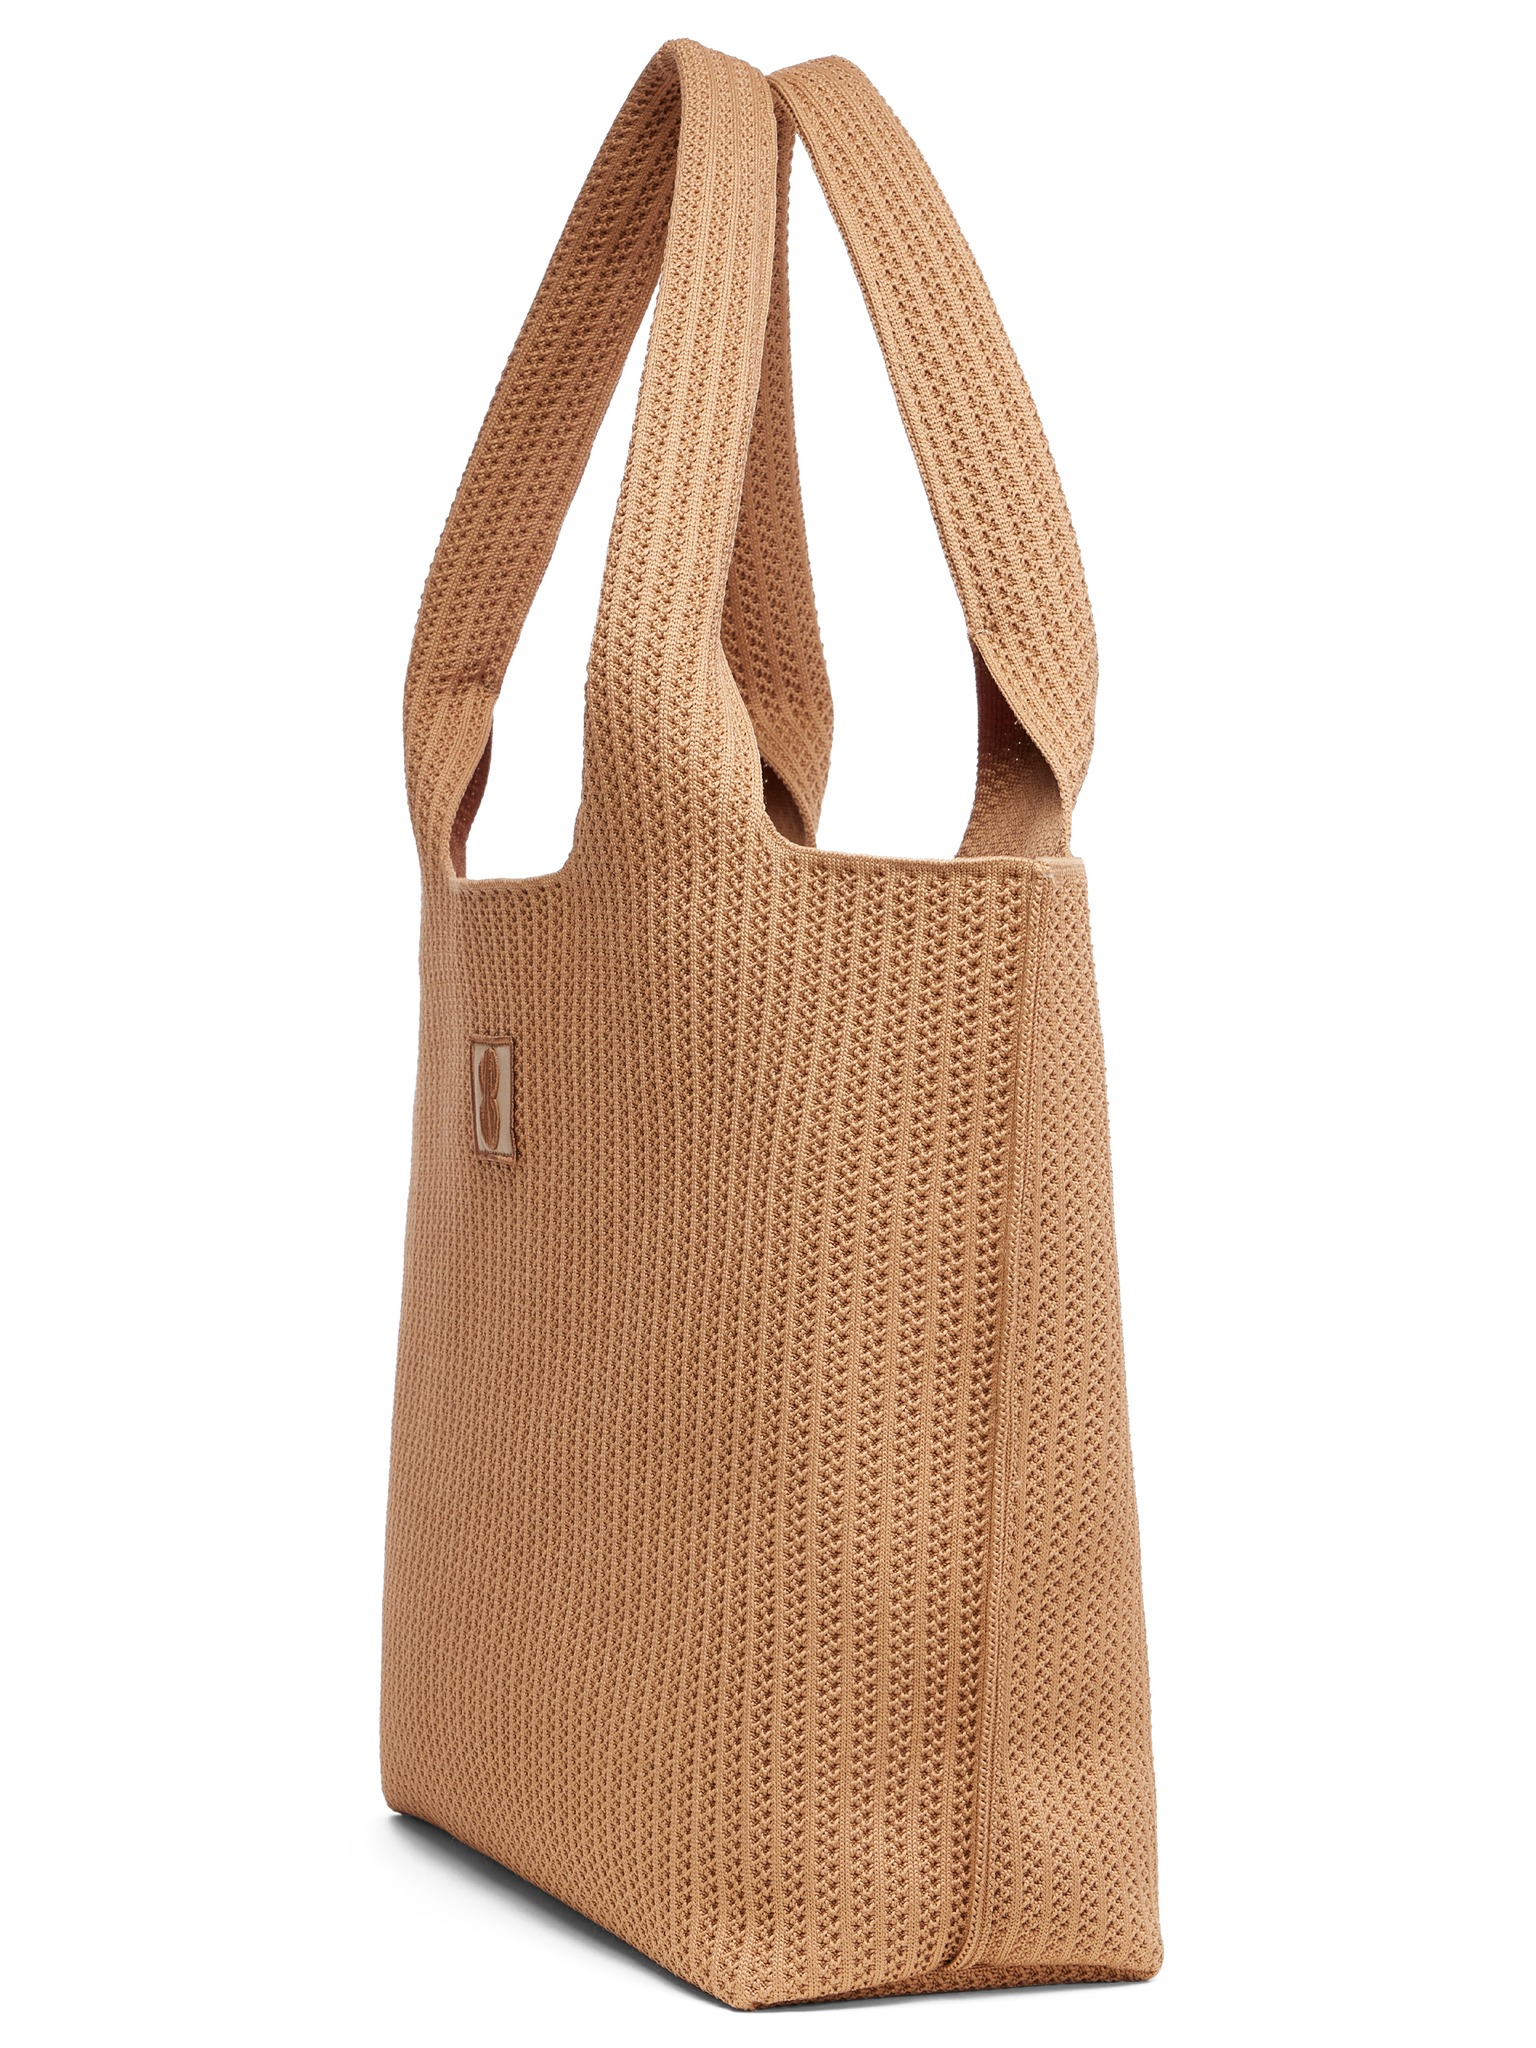 large - Buckthorn Stripe tote with pouch